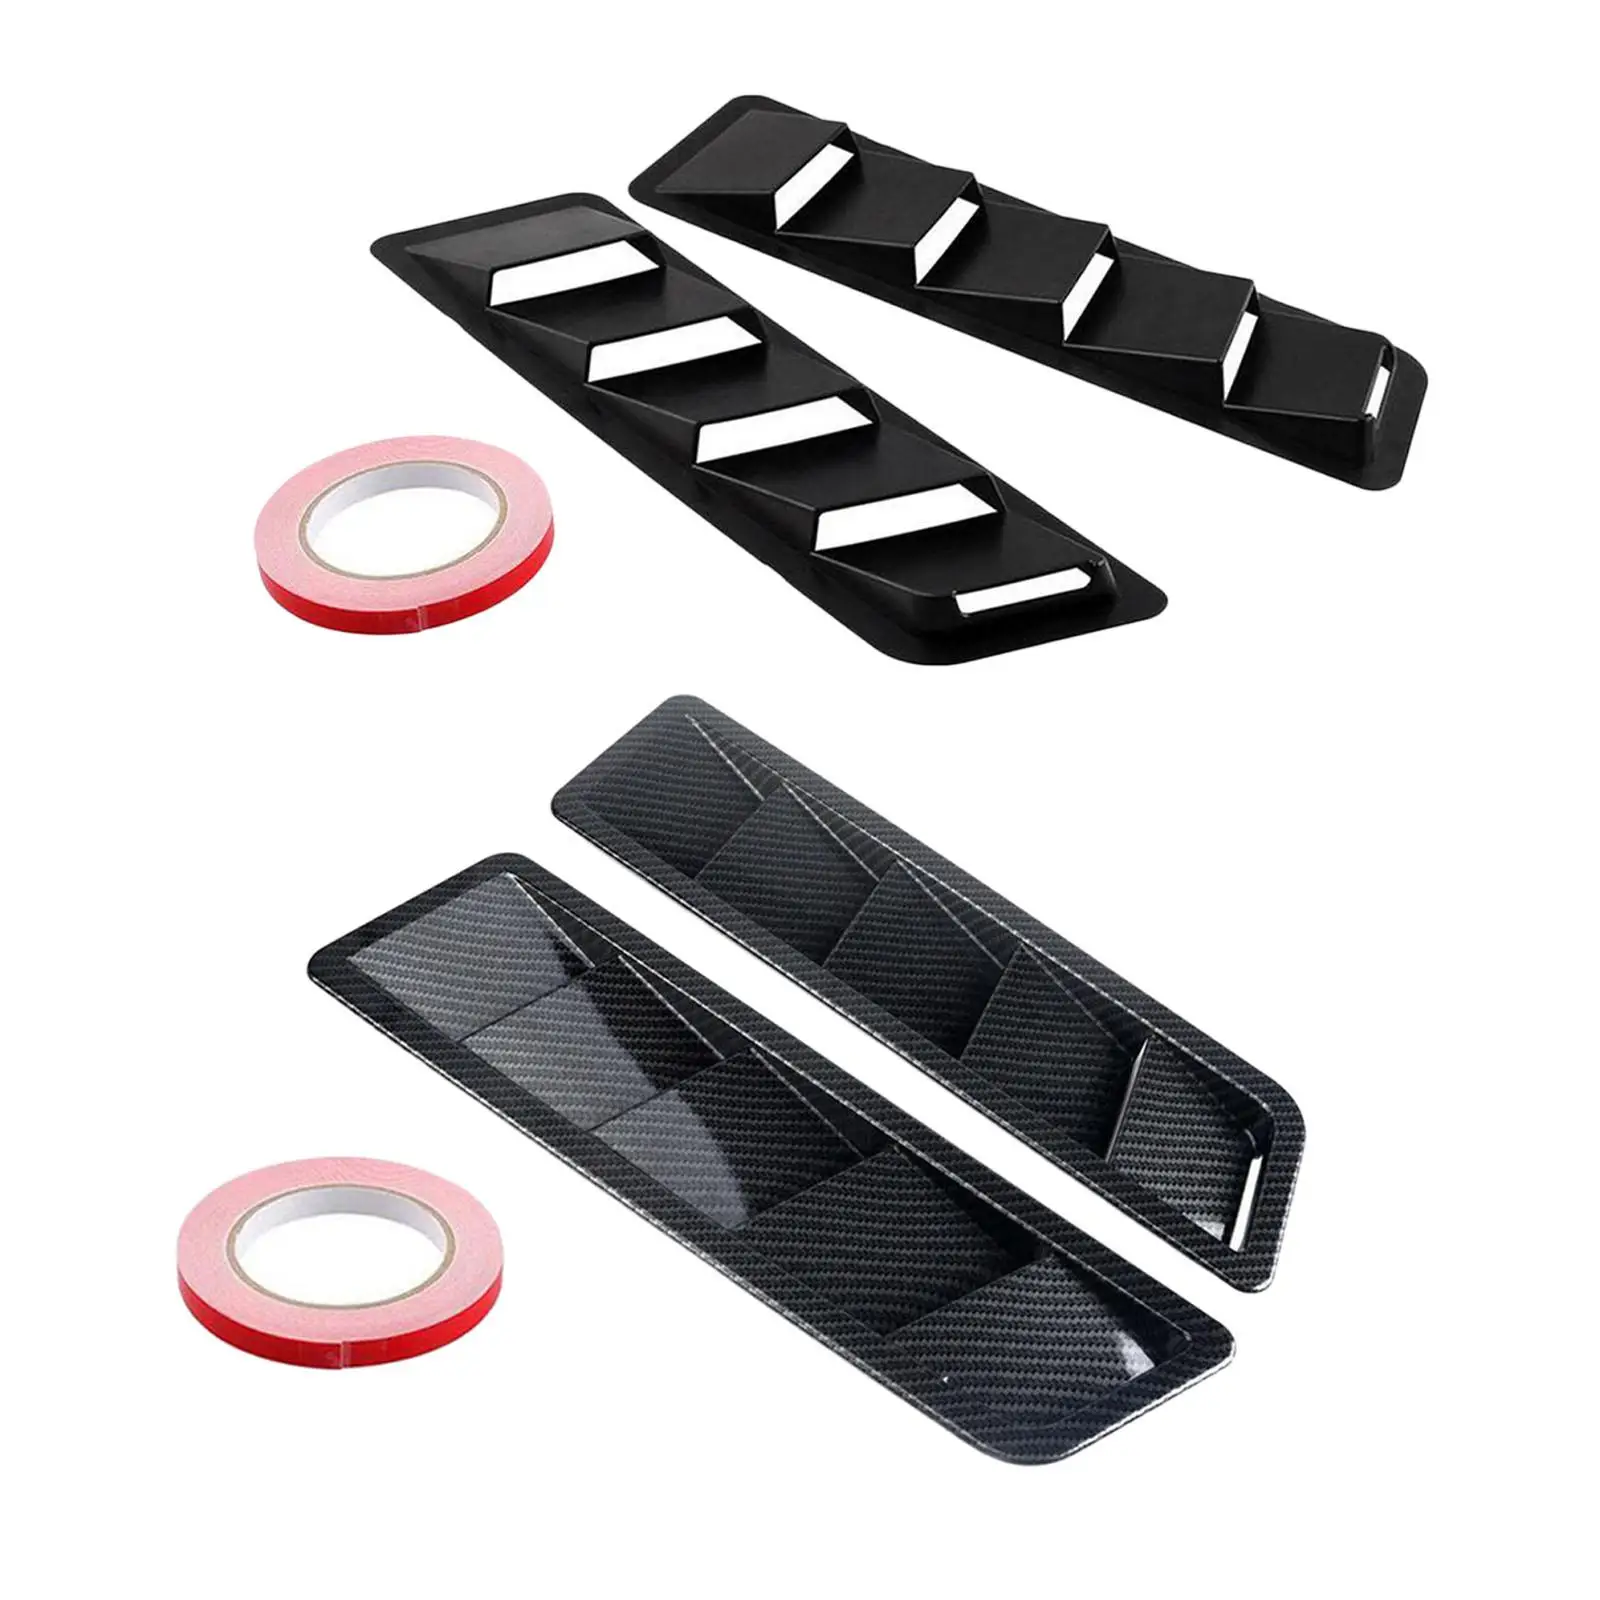 Car Hood Vent Scoop Kit Vents Bonnet Cover Air Flow Intake Vehicles Cooling Intakes Universial Louver for Acceories